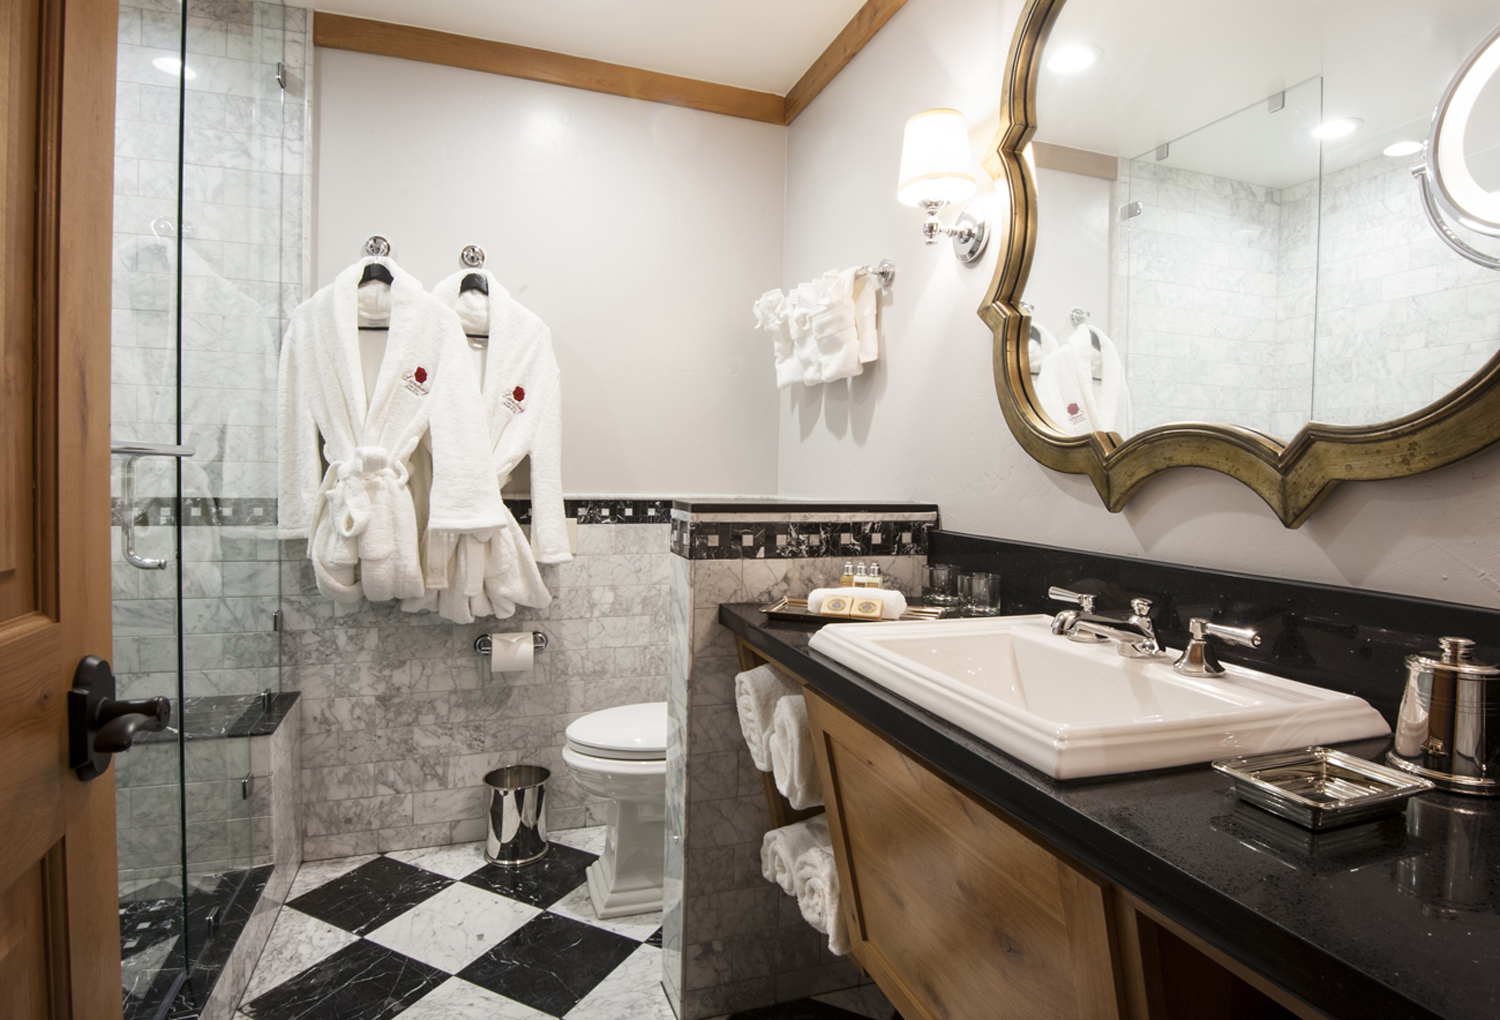 The Landing’s elegant bathrooms include cushy robes and a spa-like feel.